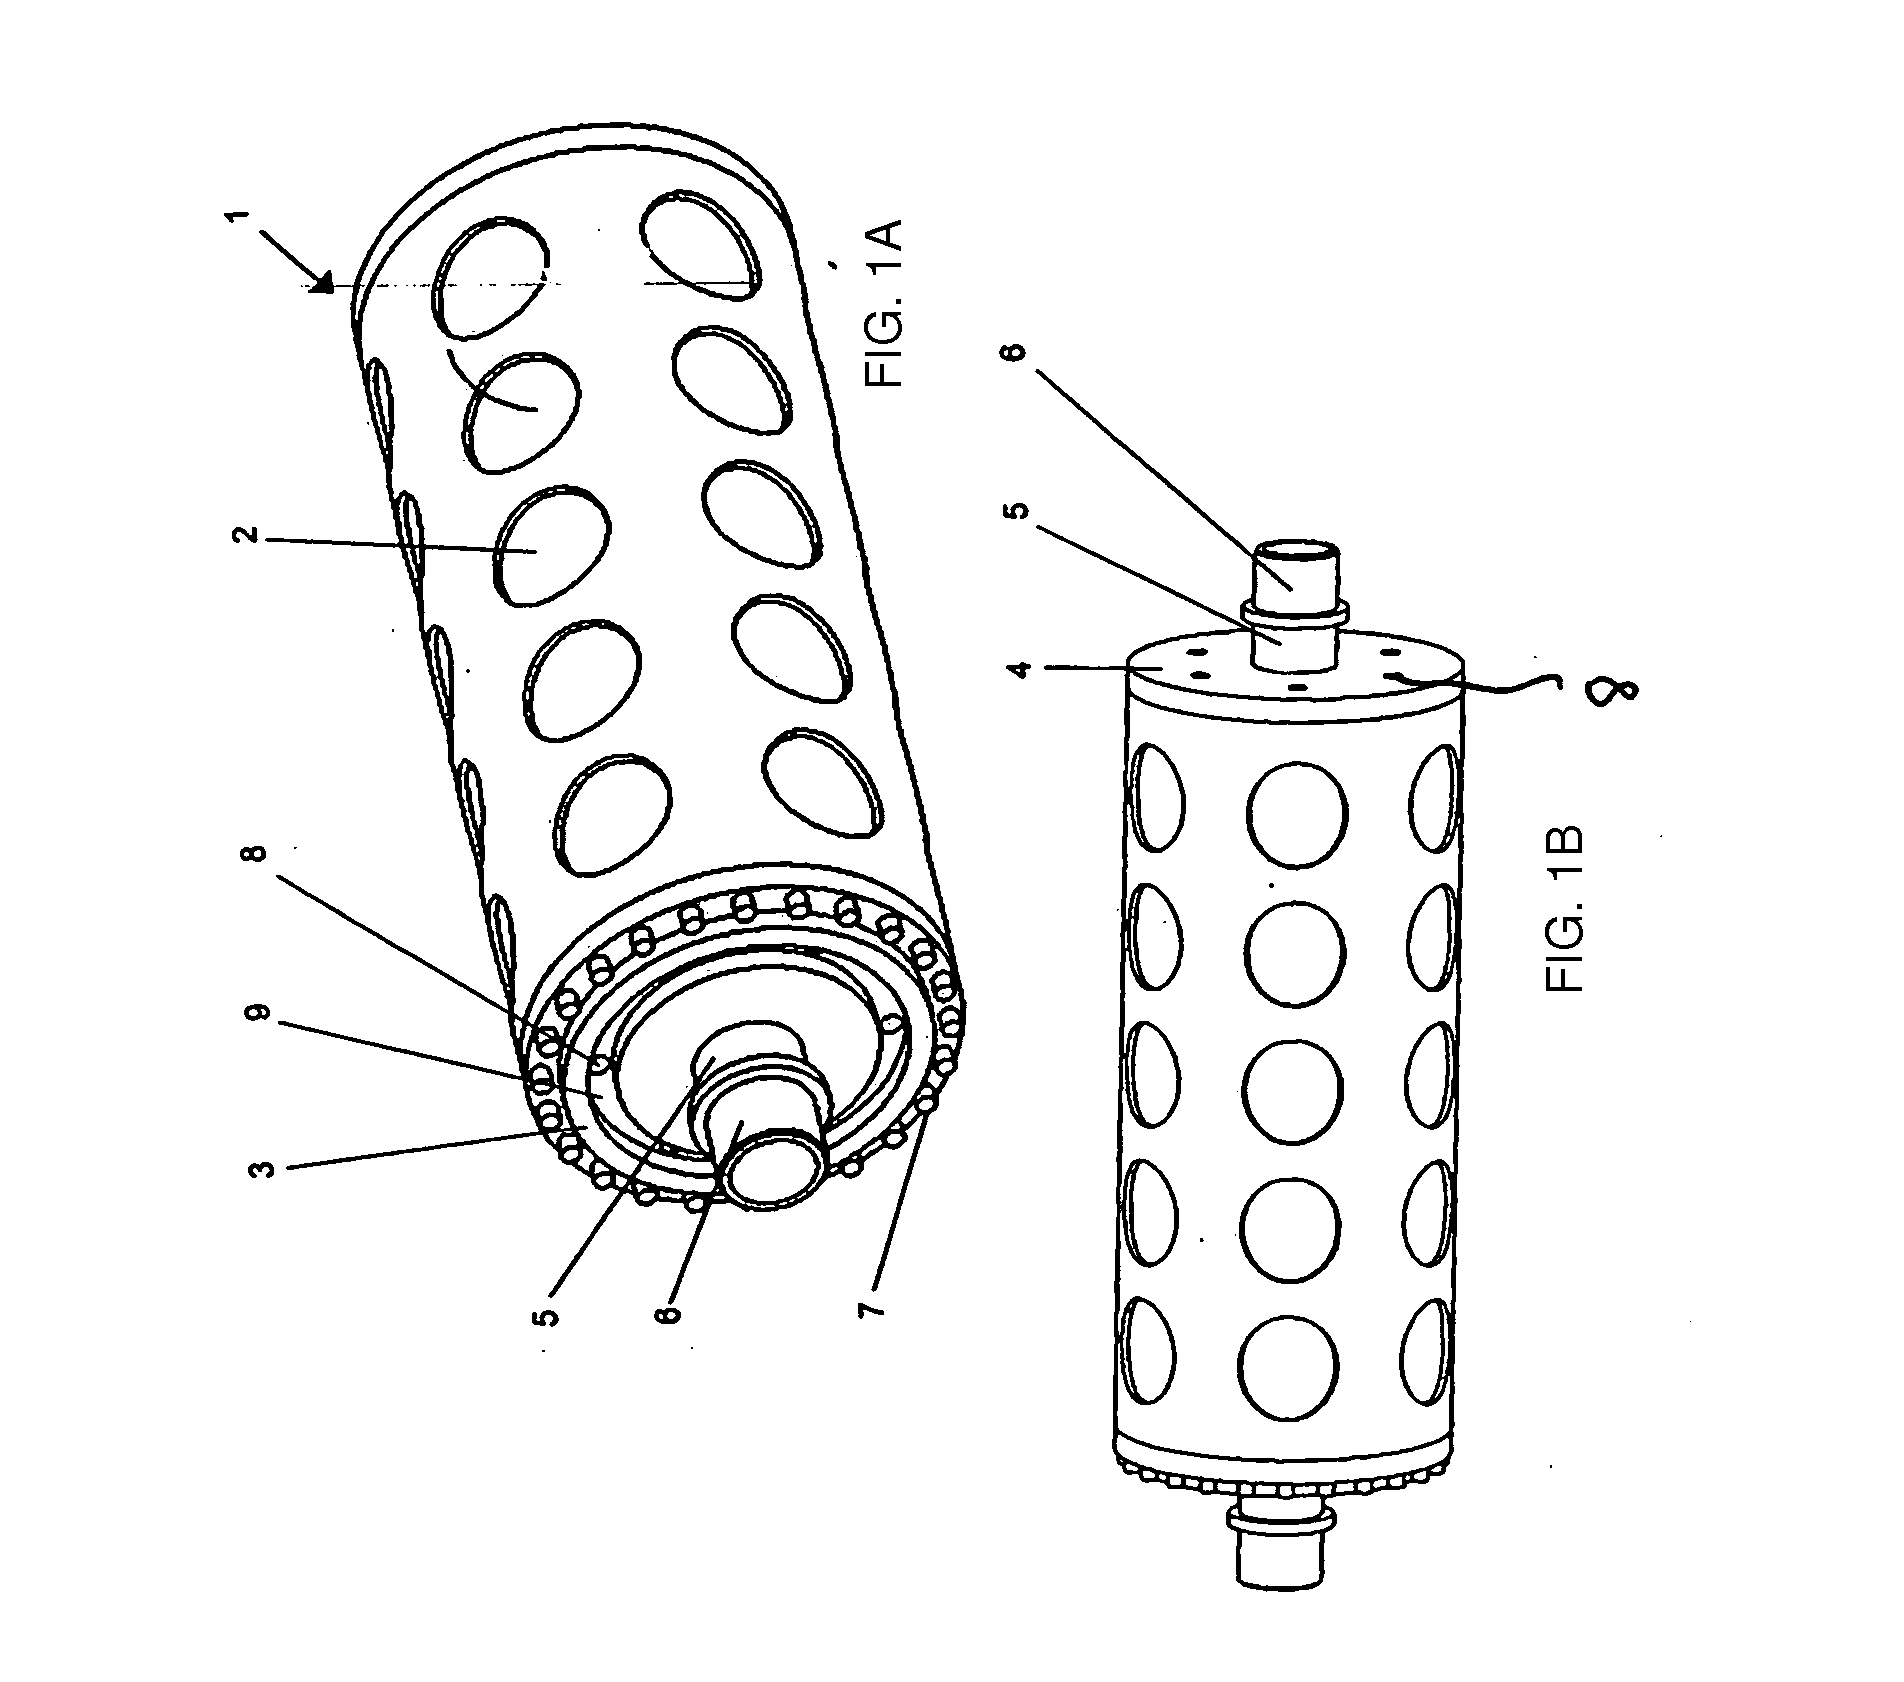 Apparatus and methods for cleaning a mould drum